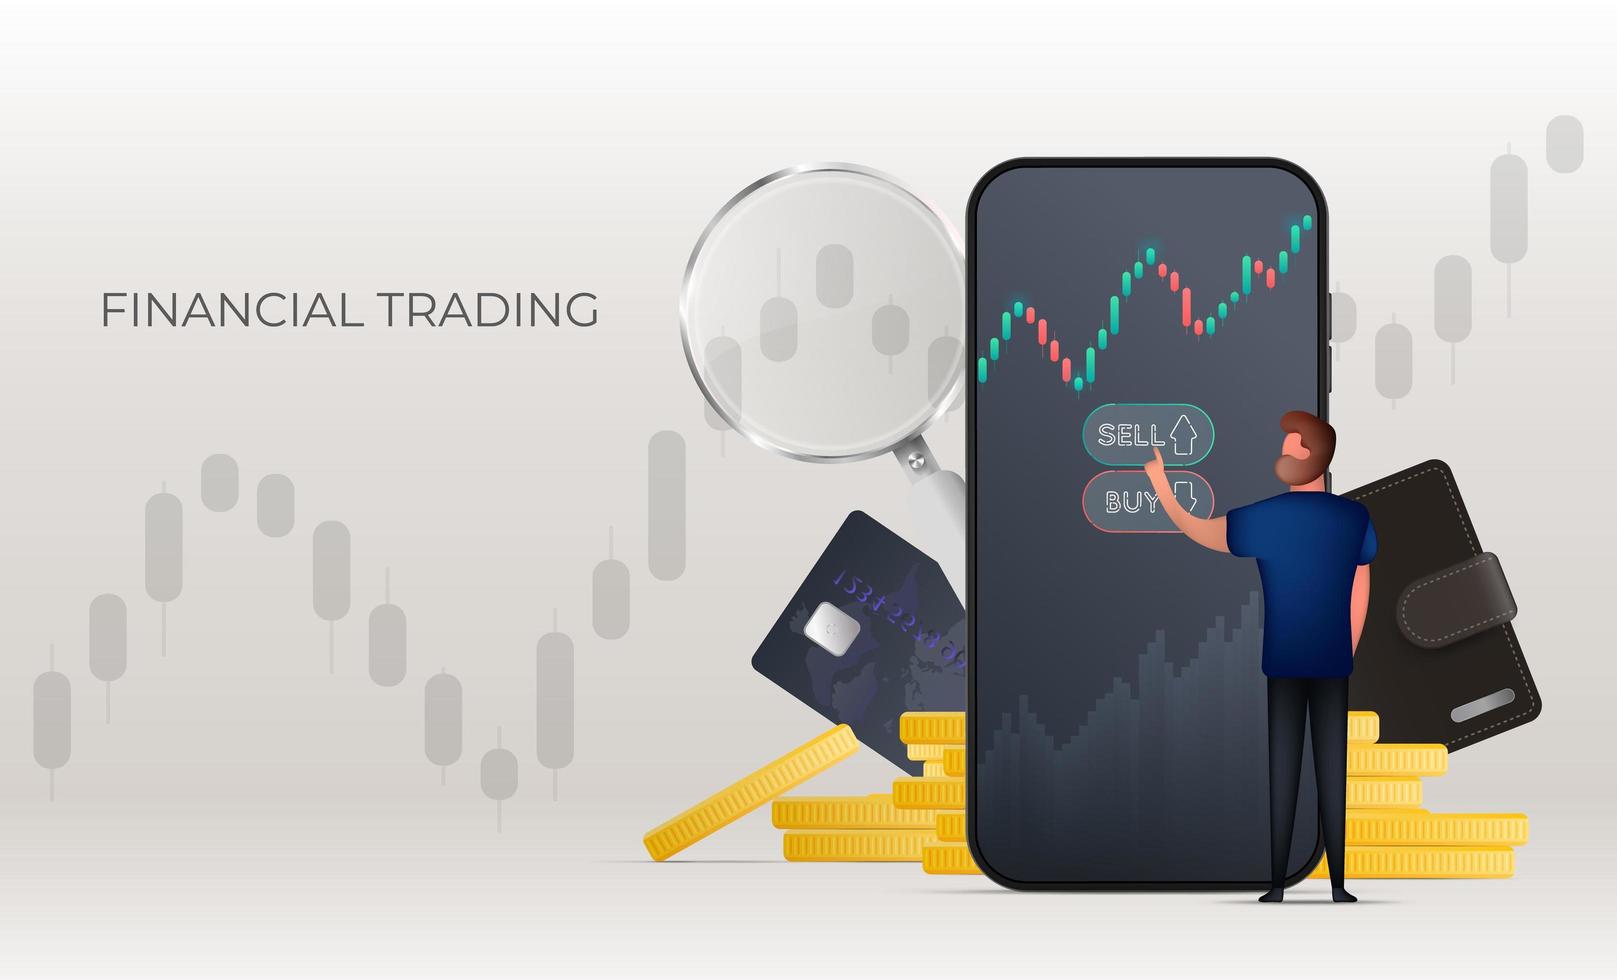 Trading banner. A man buys stocks or currency on the stock exchange through the phone. Stock market investment trading concept. Candlestick chart. Vector illustration.